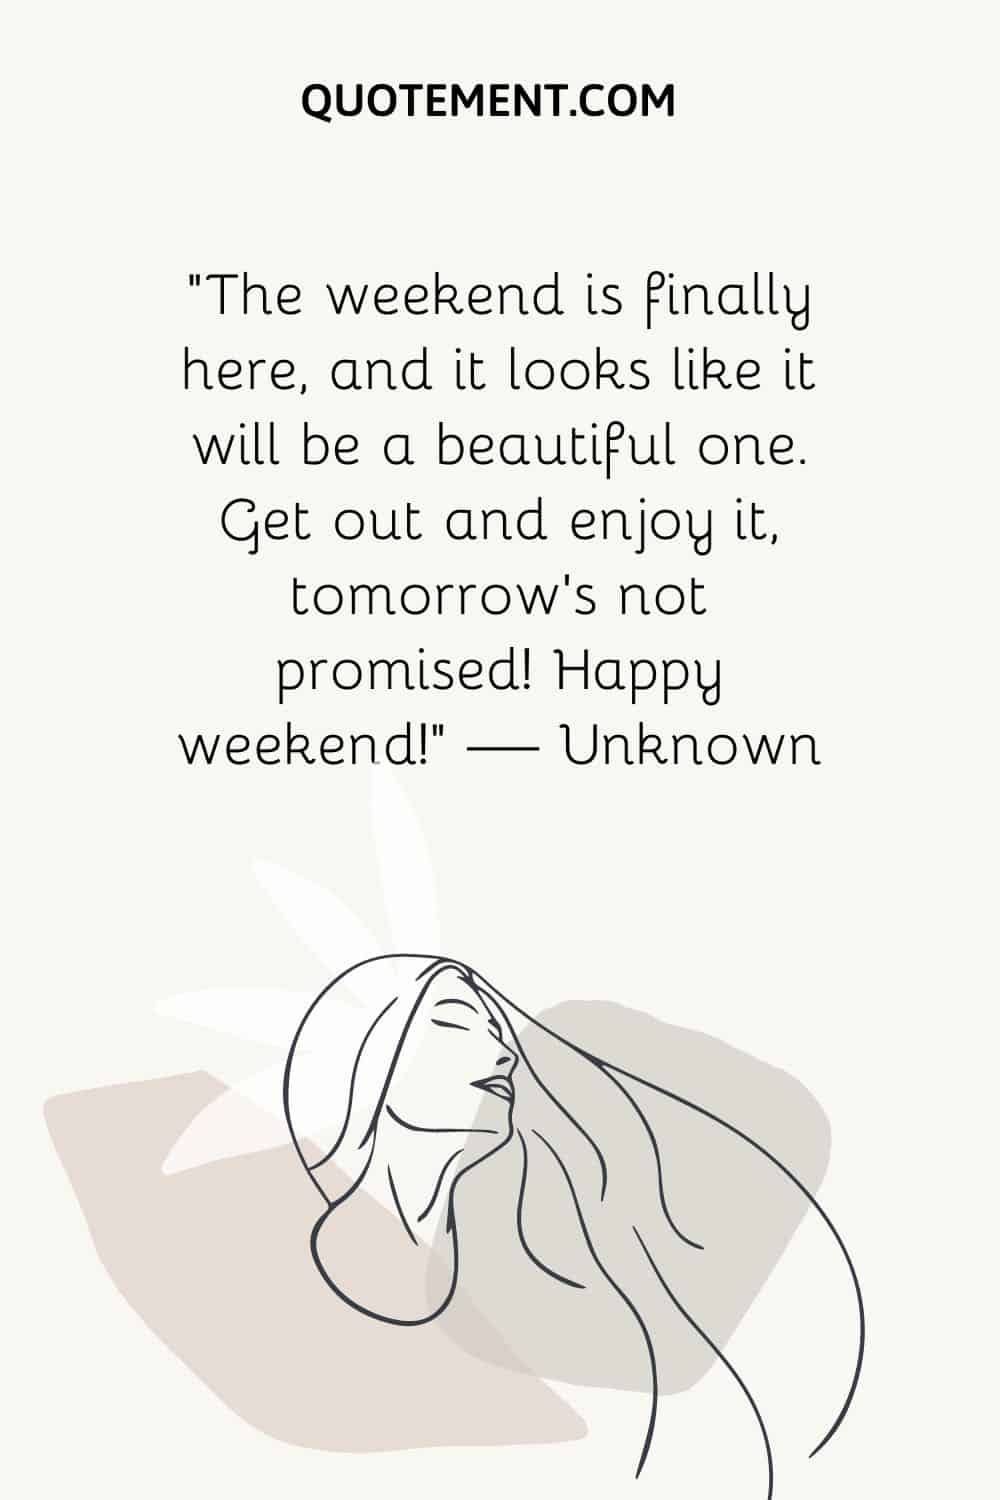 “The weekend is finally here, and it looks like it will be a beautiful one. Get out and enjoy it, tomorrow’s not promised! Happy weekend!” — Unknown